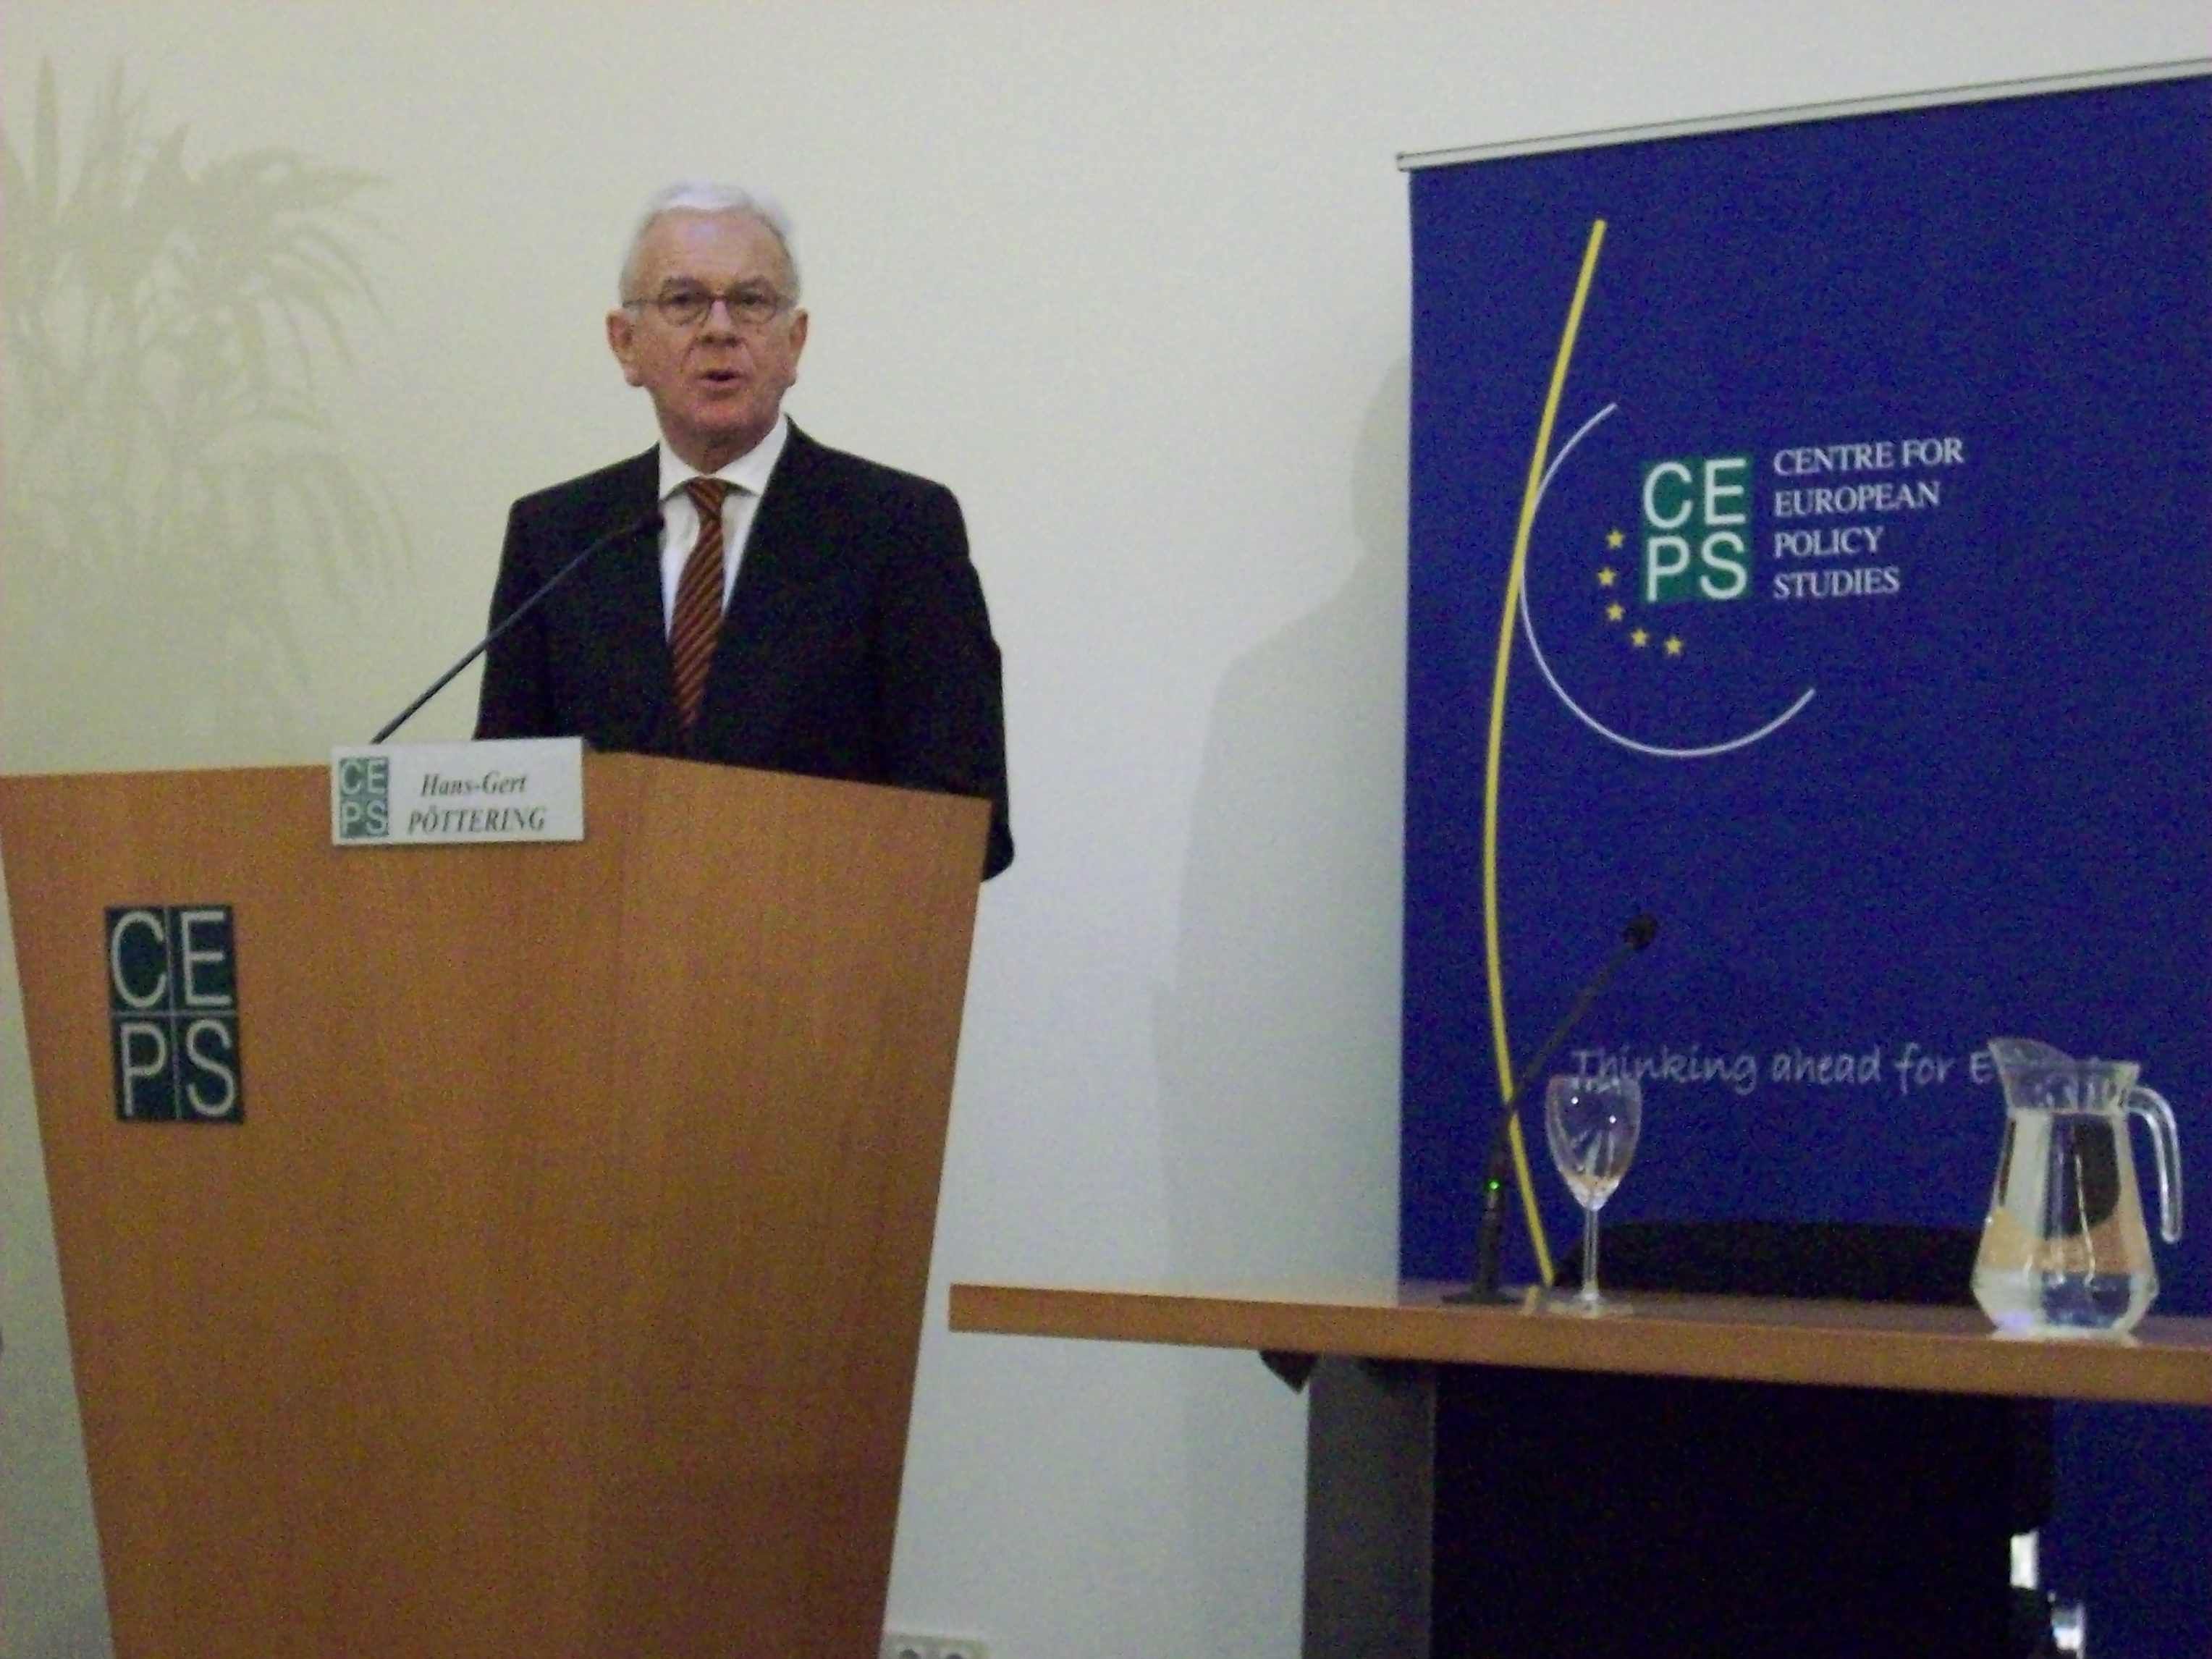 Pöttering dwelled on the importance of human rights, democracy and the rule of law as defining features of the EU. 